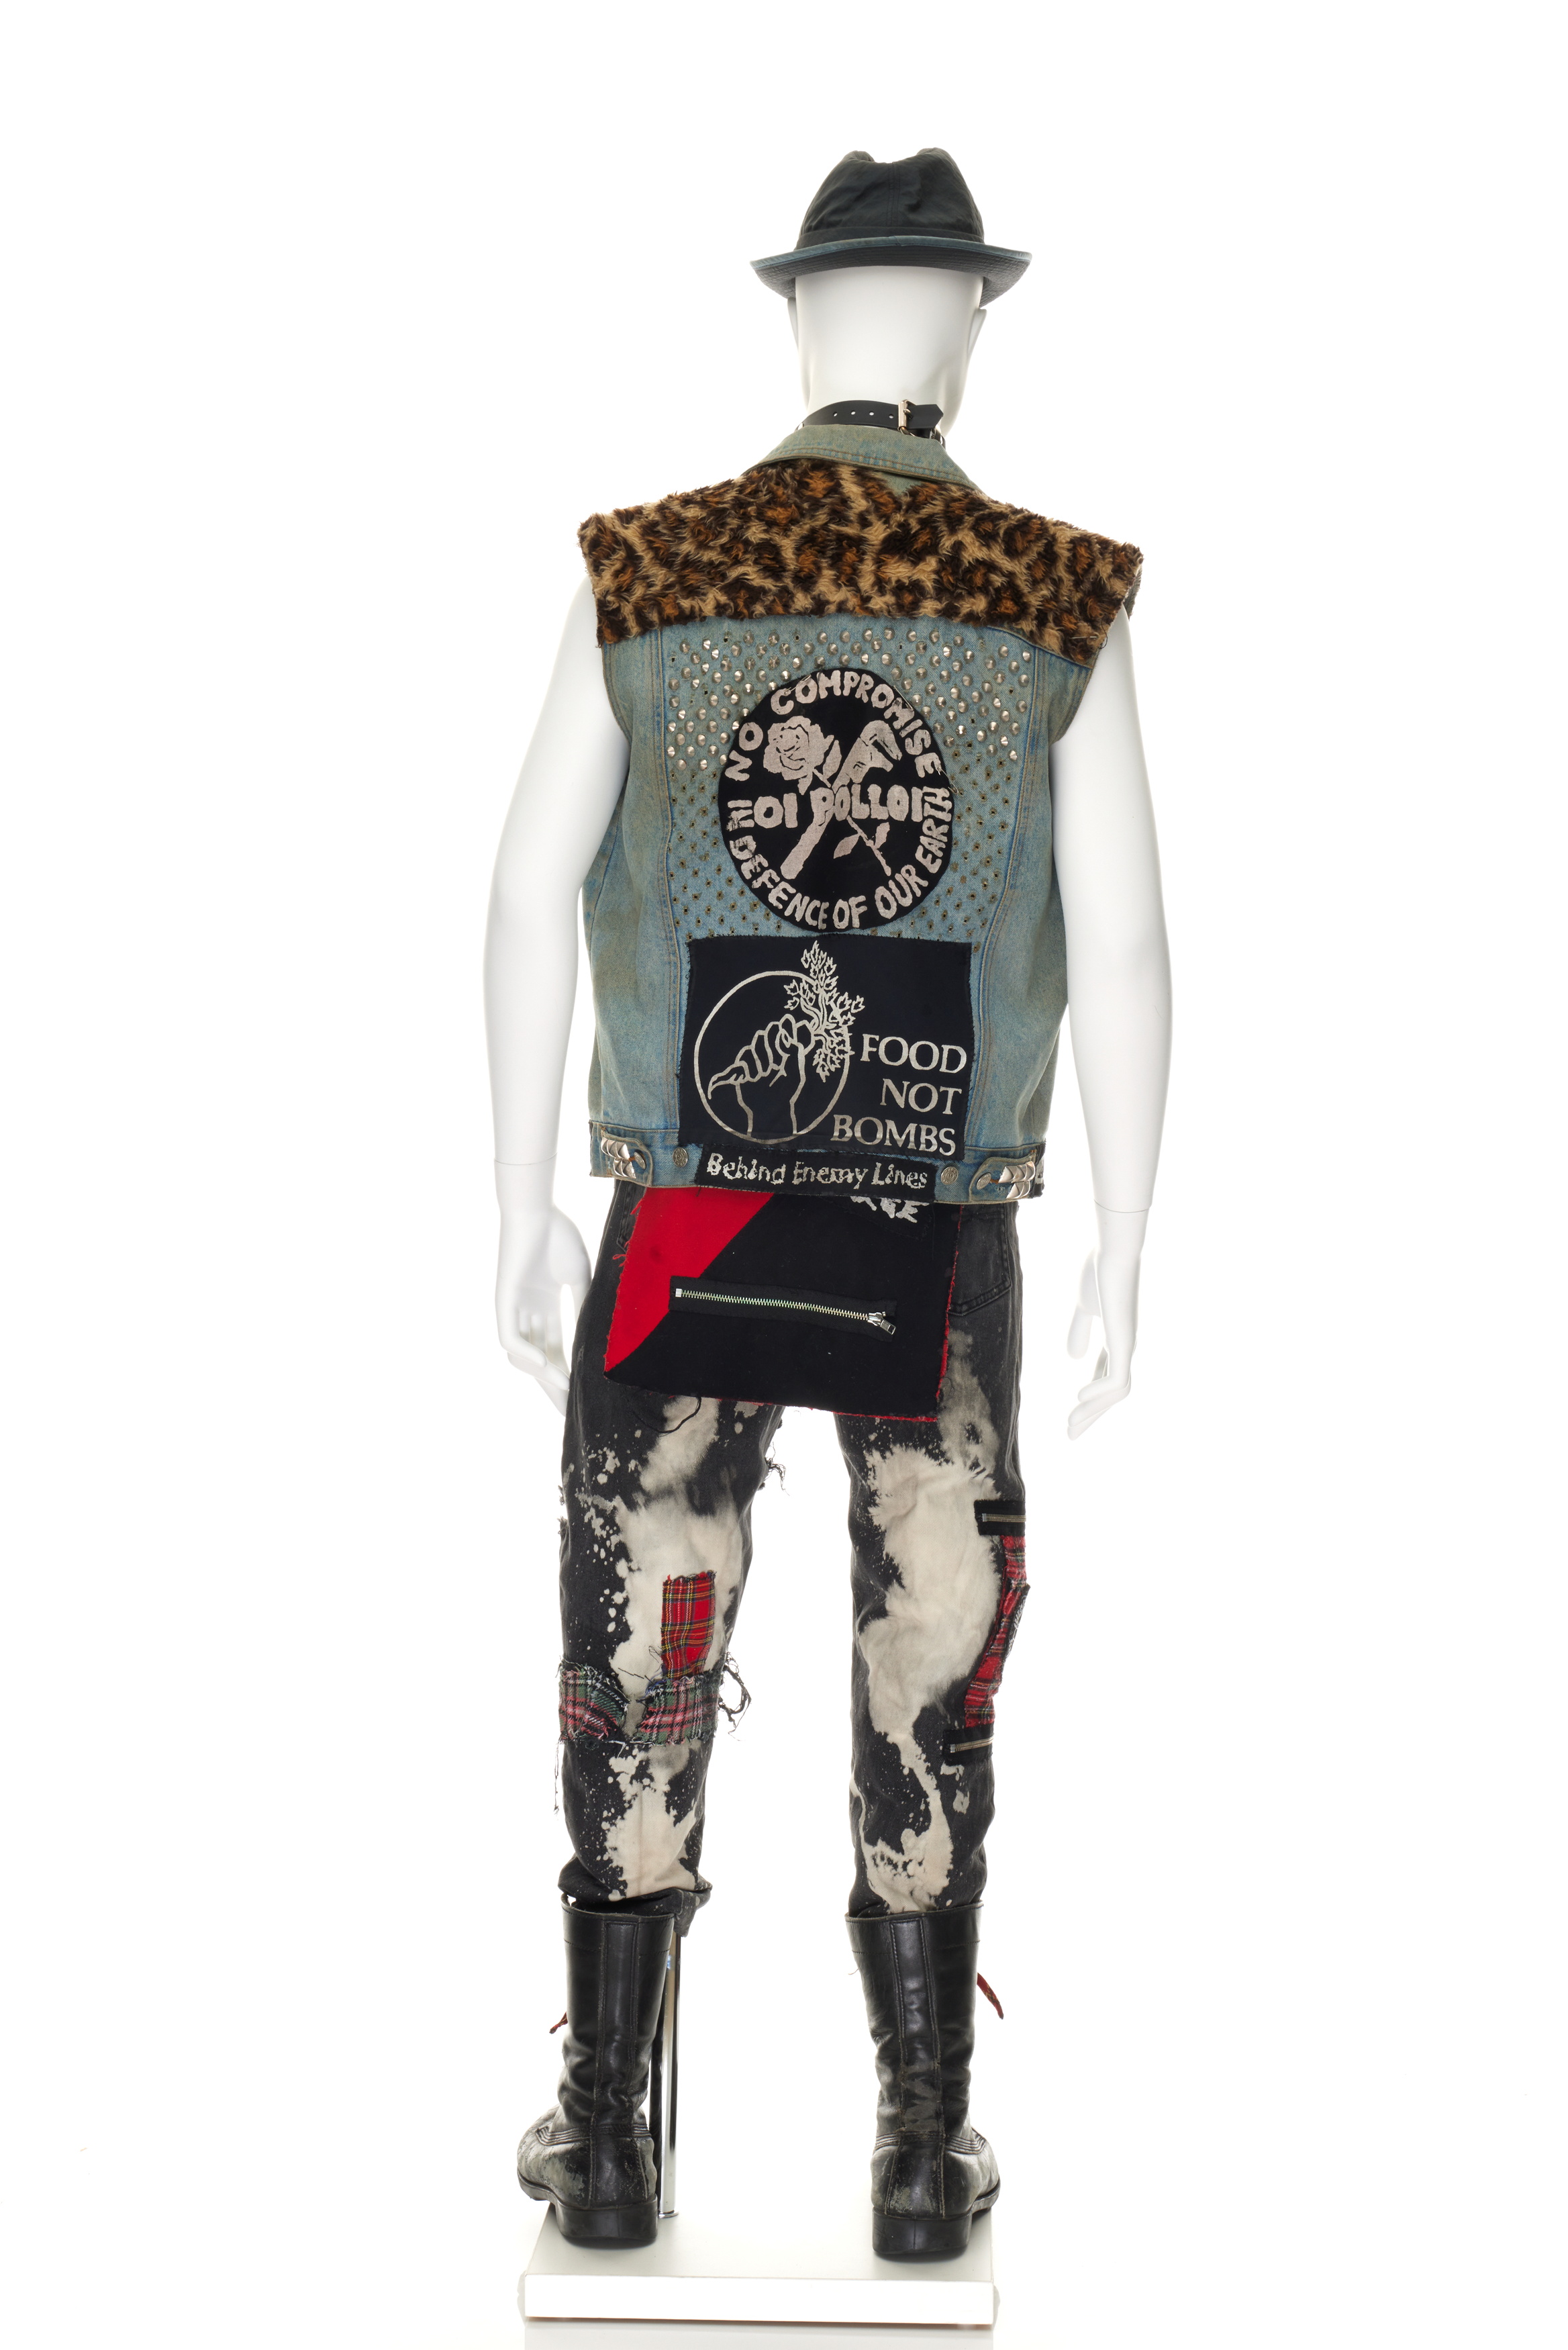 Men's punk outfit remade and worn by Lewis Nicolson.